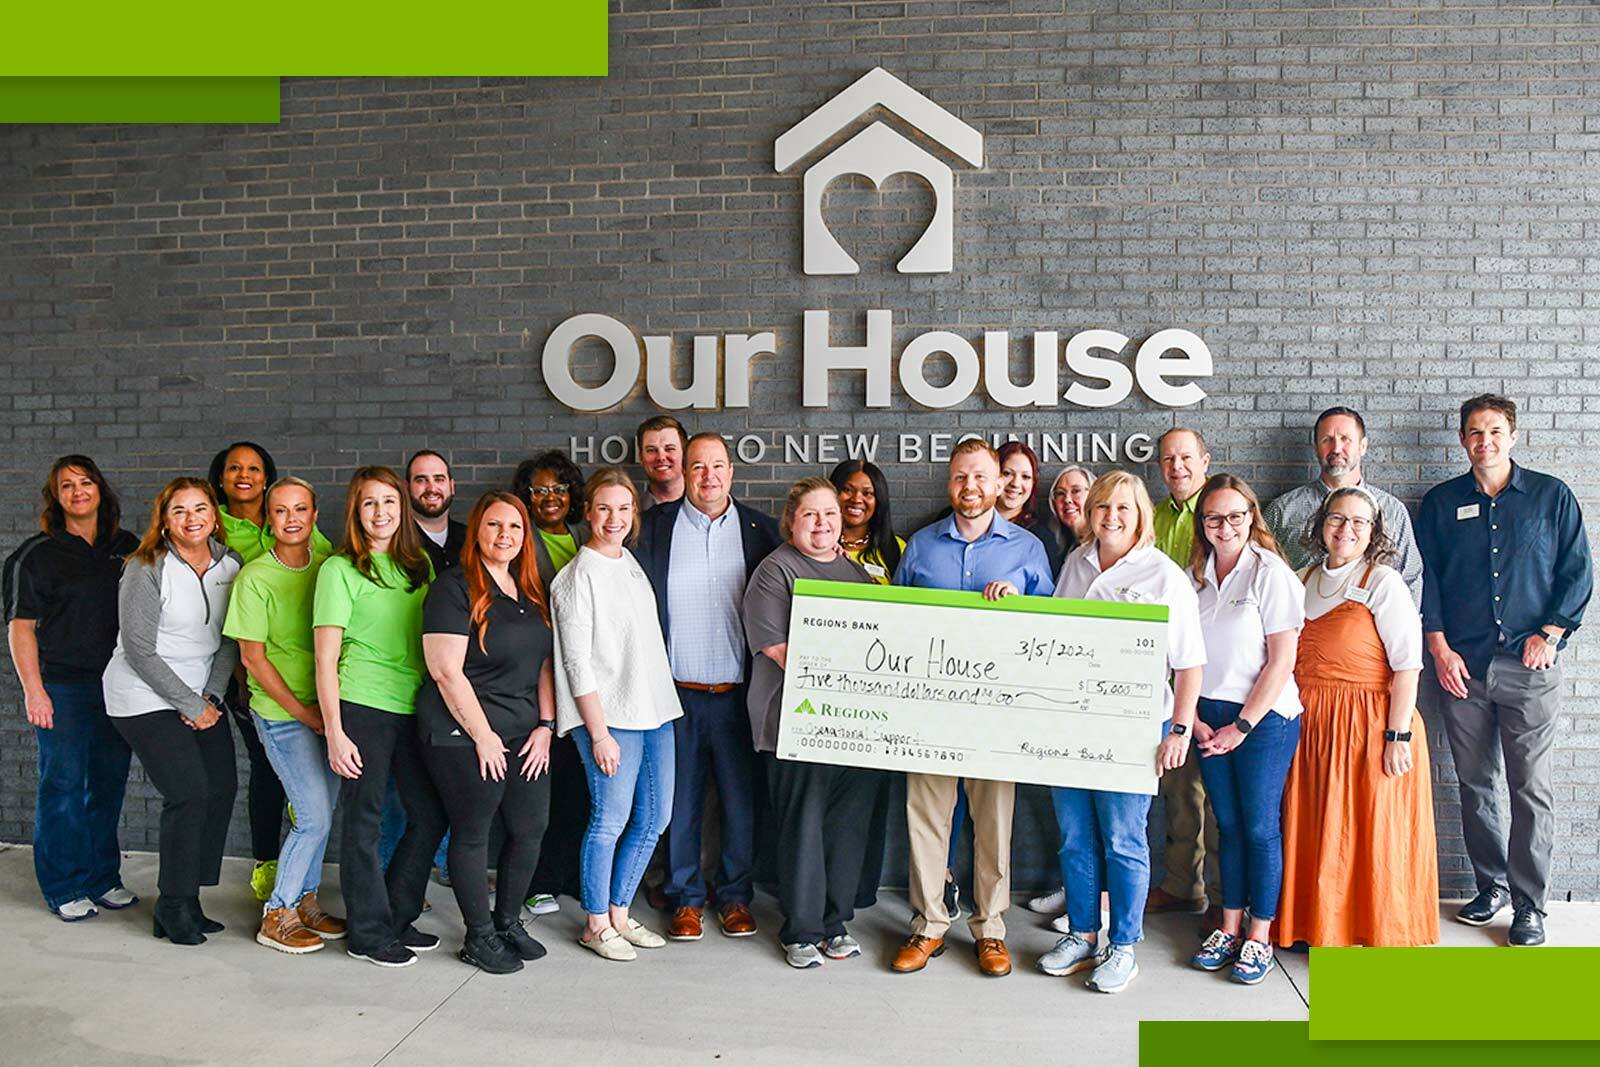 Our House group photo and check presentation